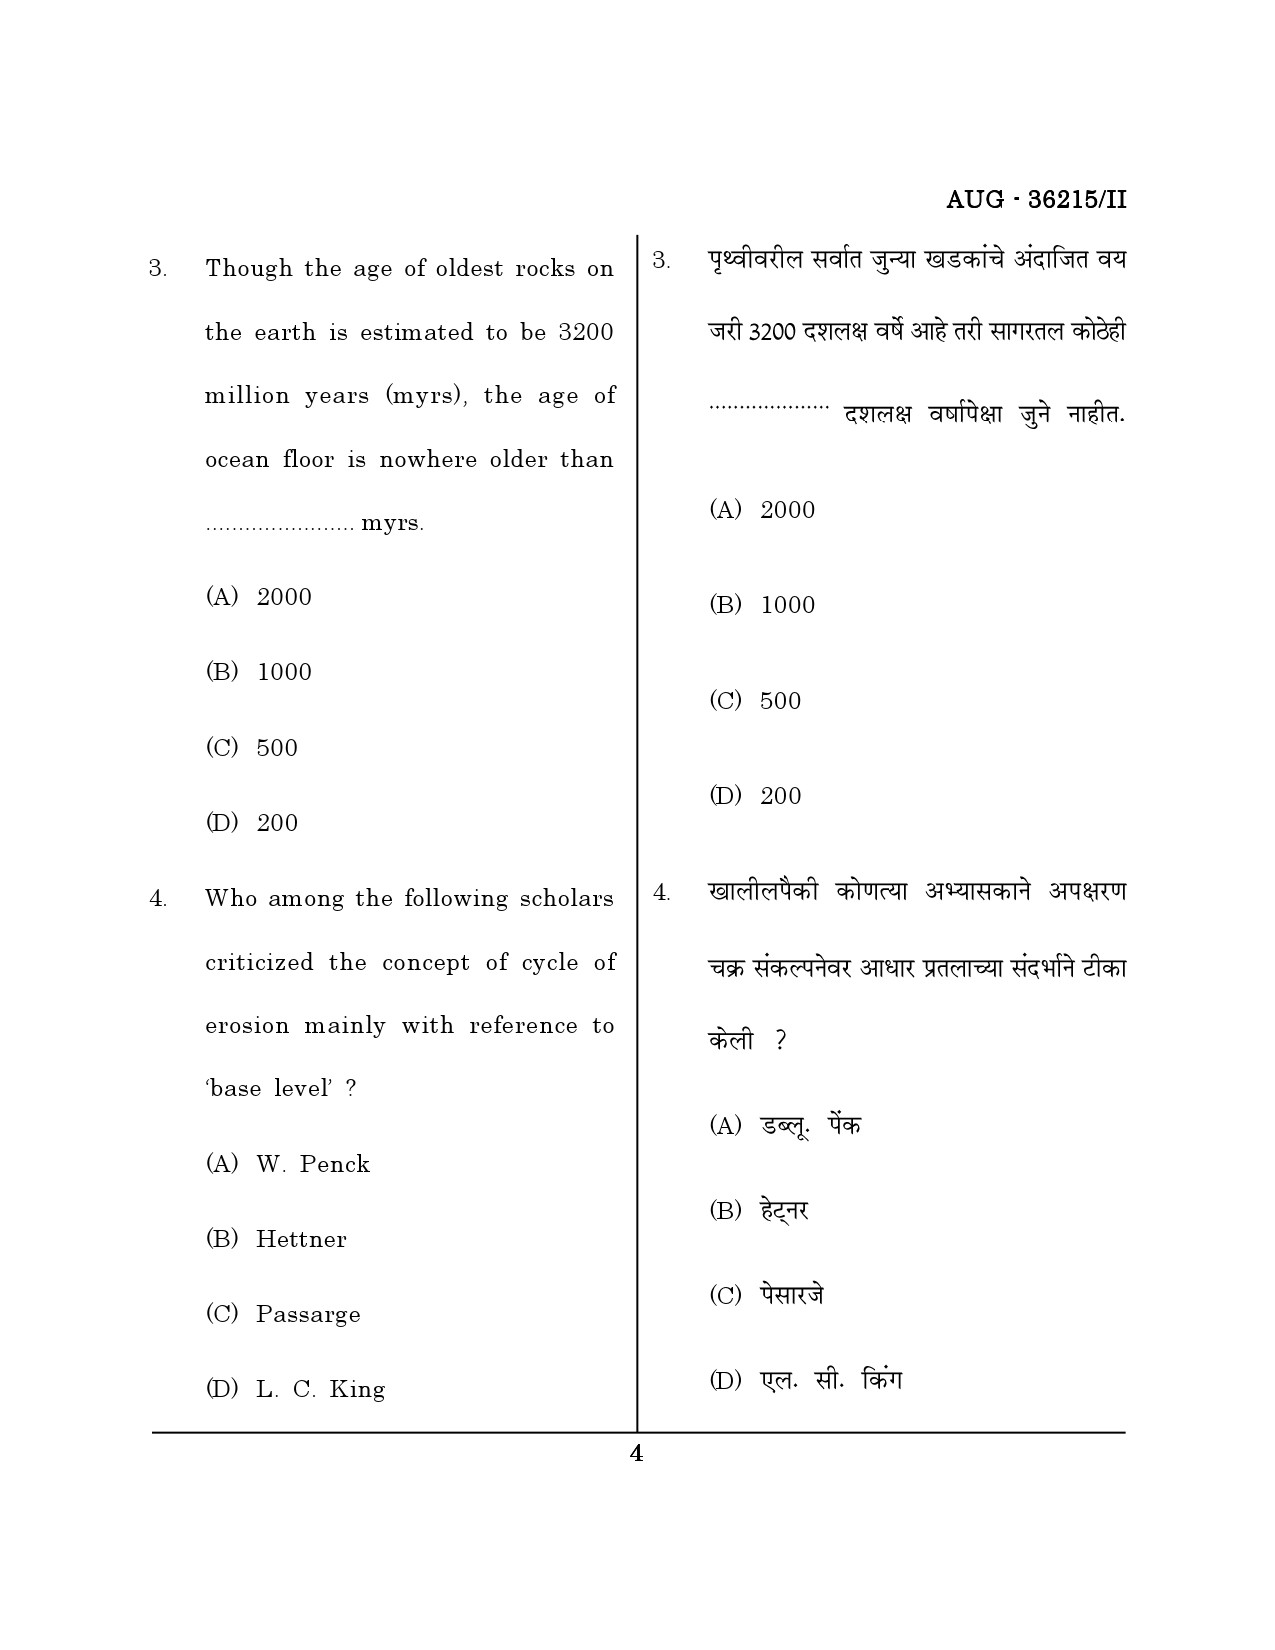 Maharashtra SET Geography Question Paper II August 2015 3